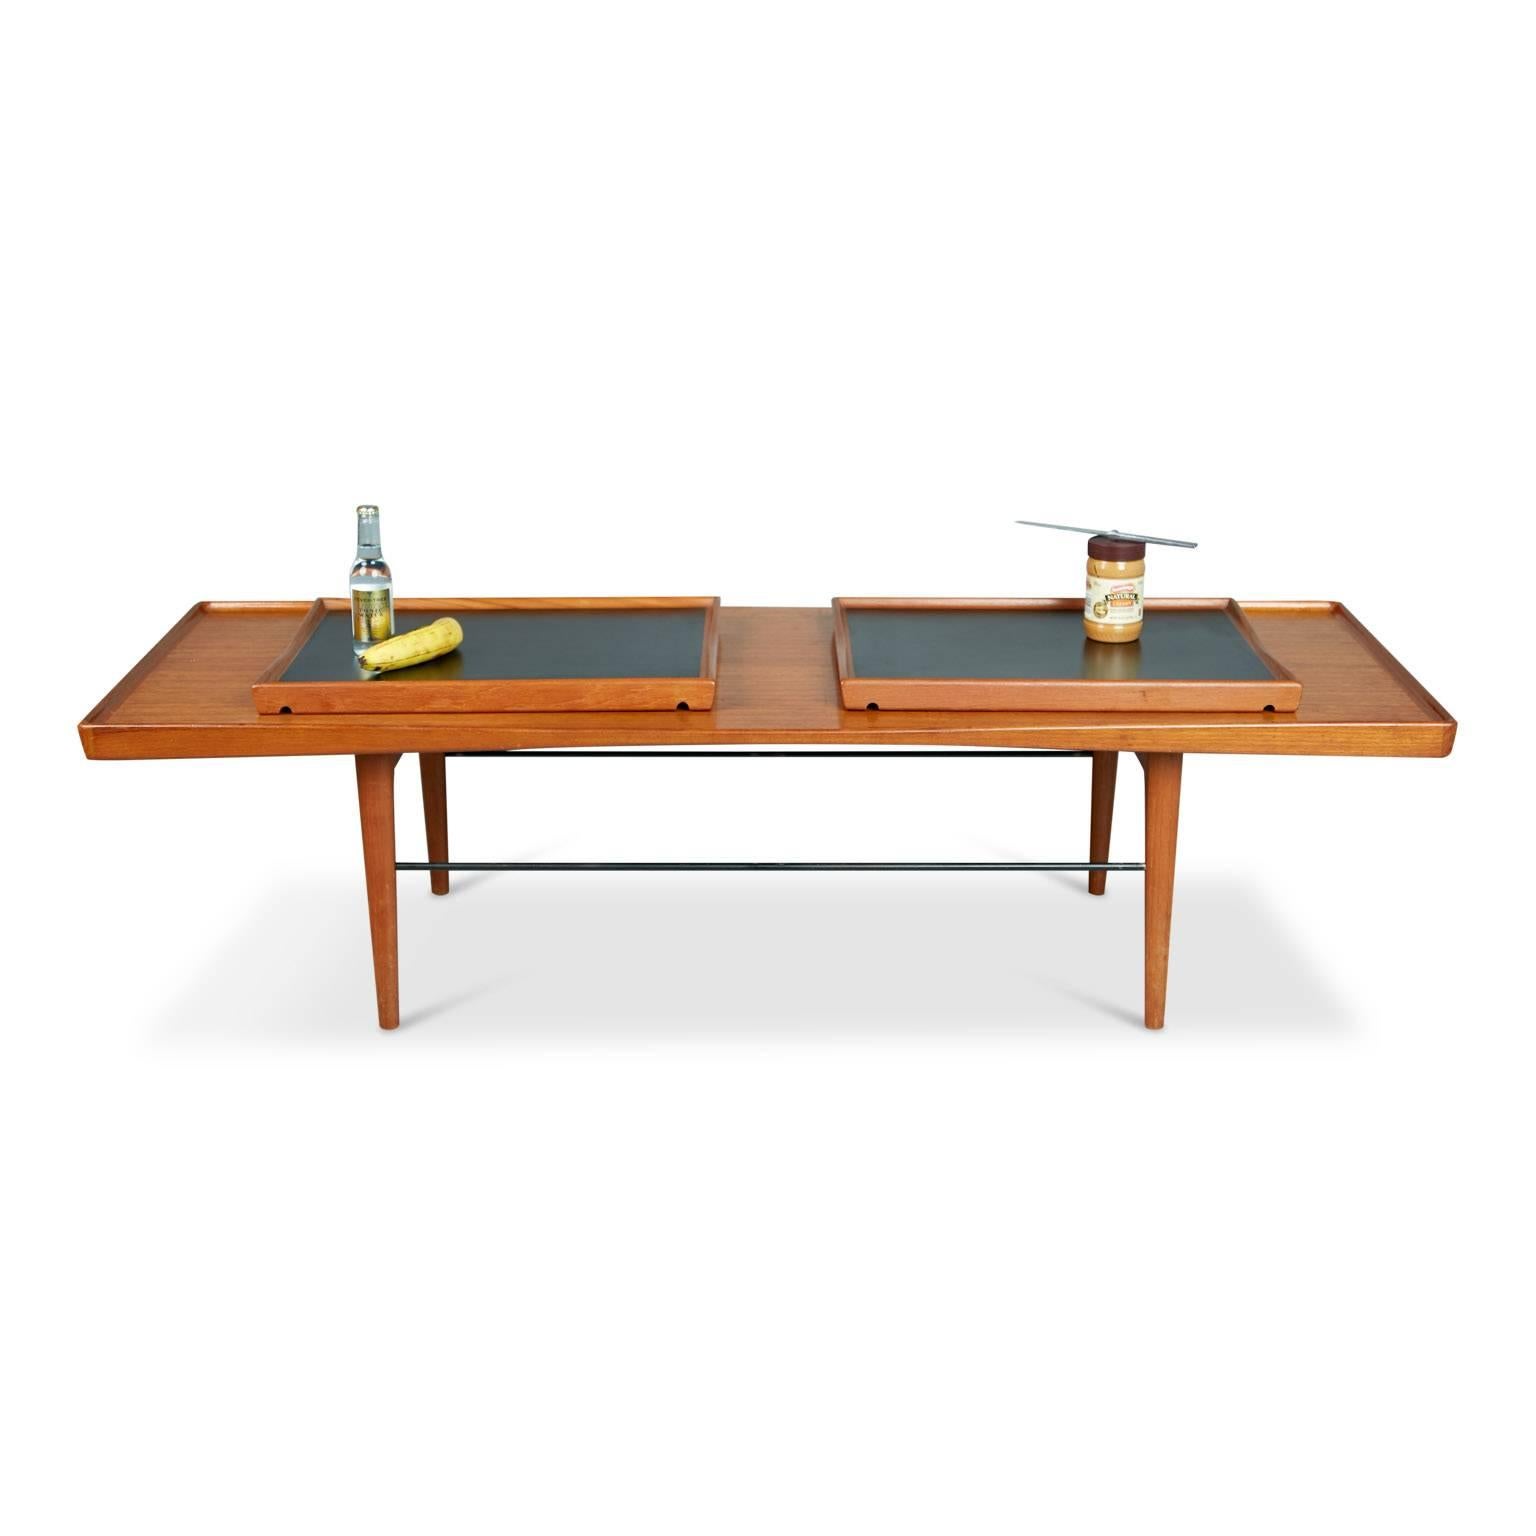 Teak Danish Modern Coffee Table with Removable Trays by Poul Jensen for Selig